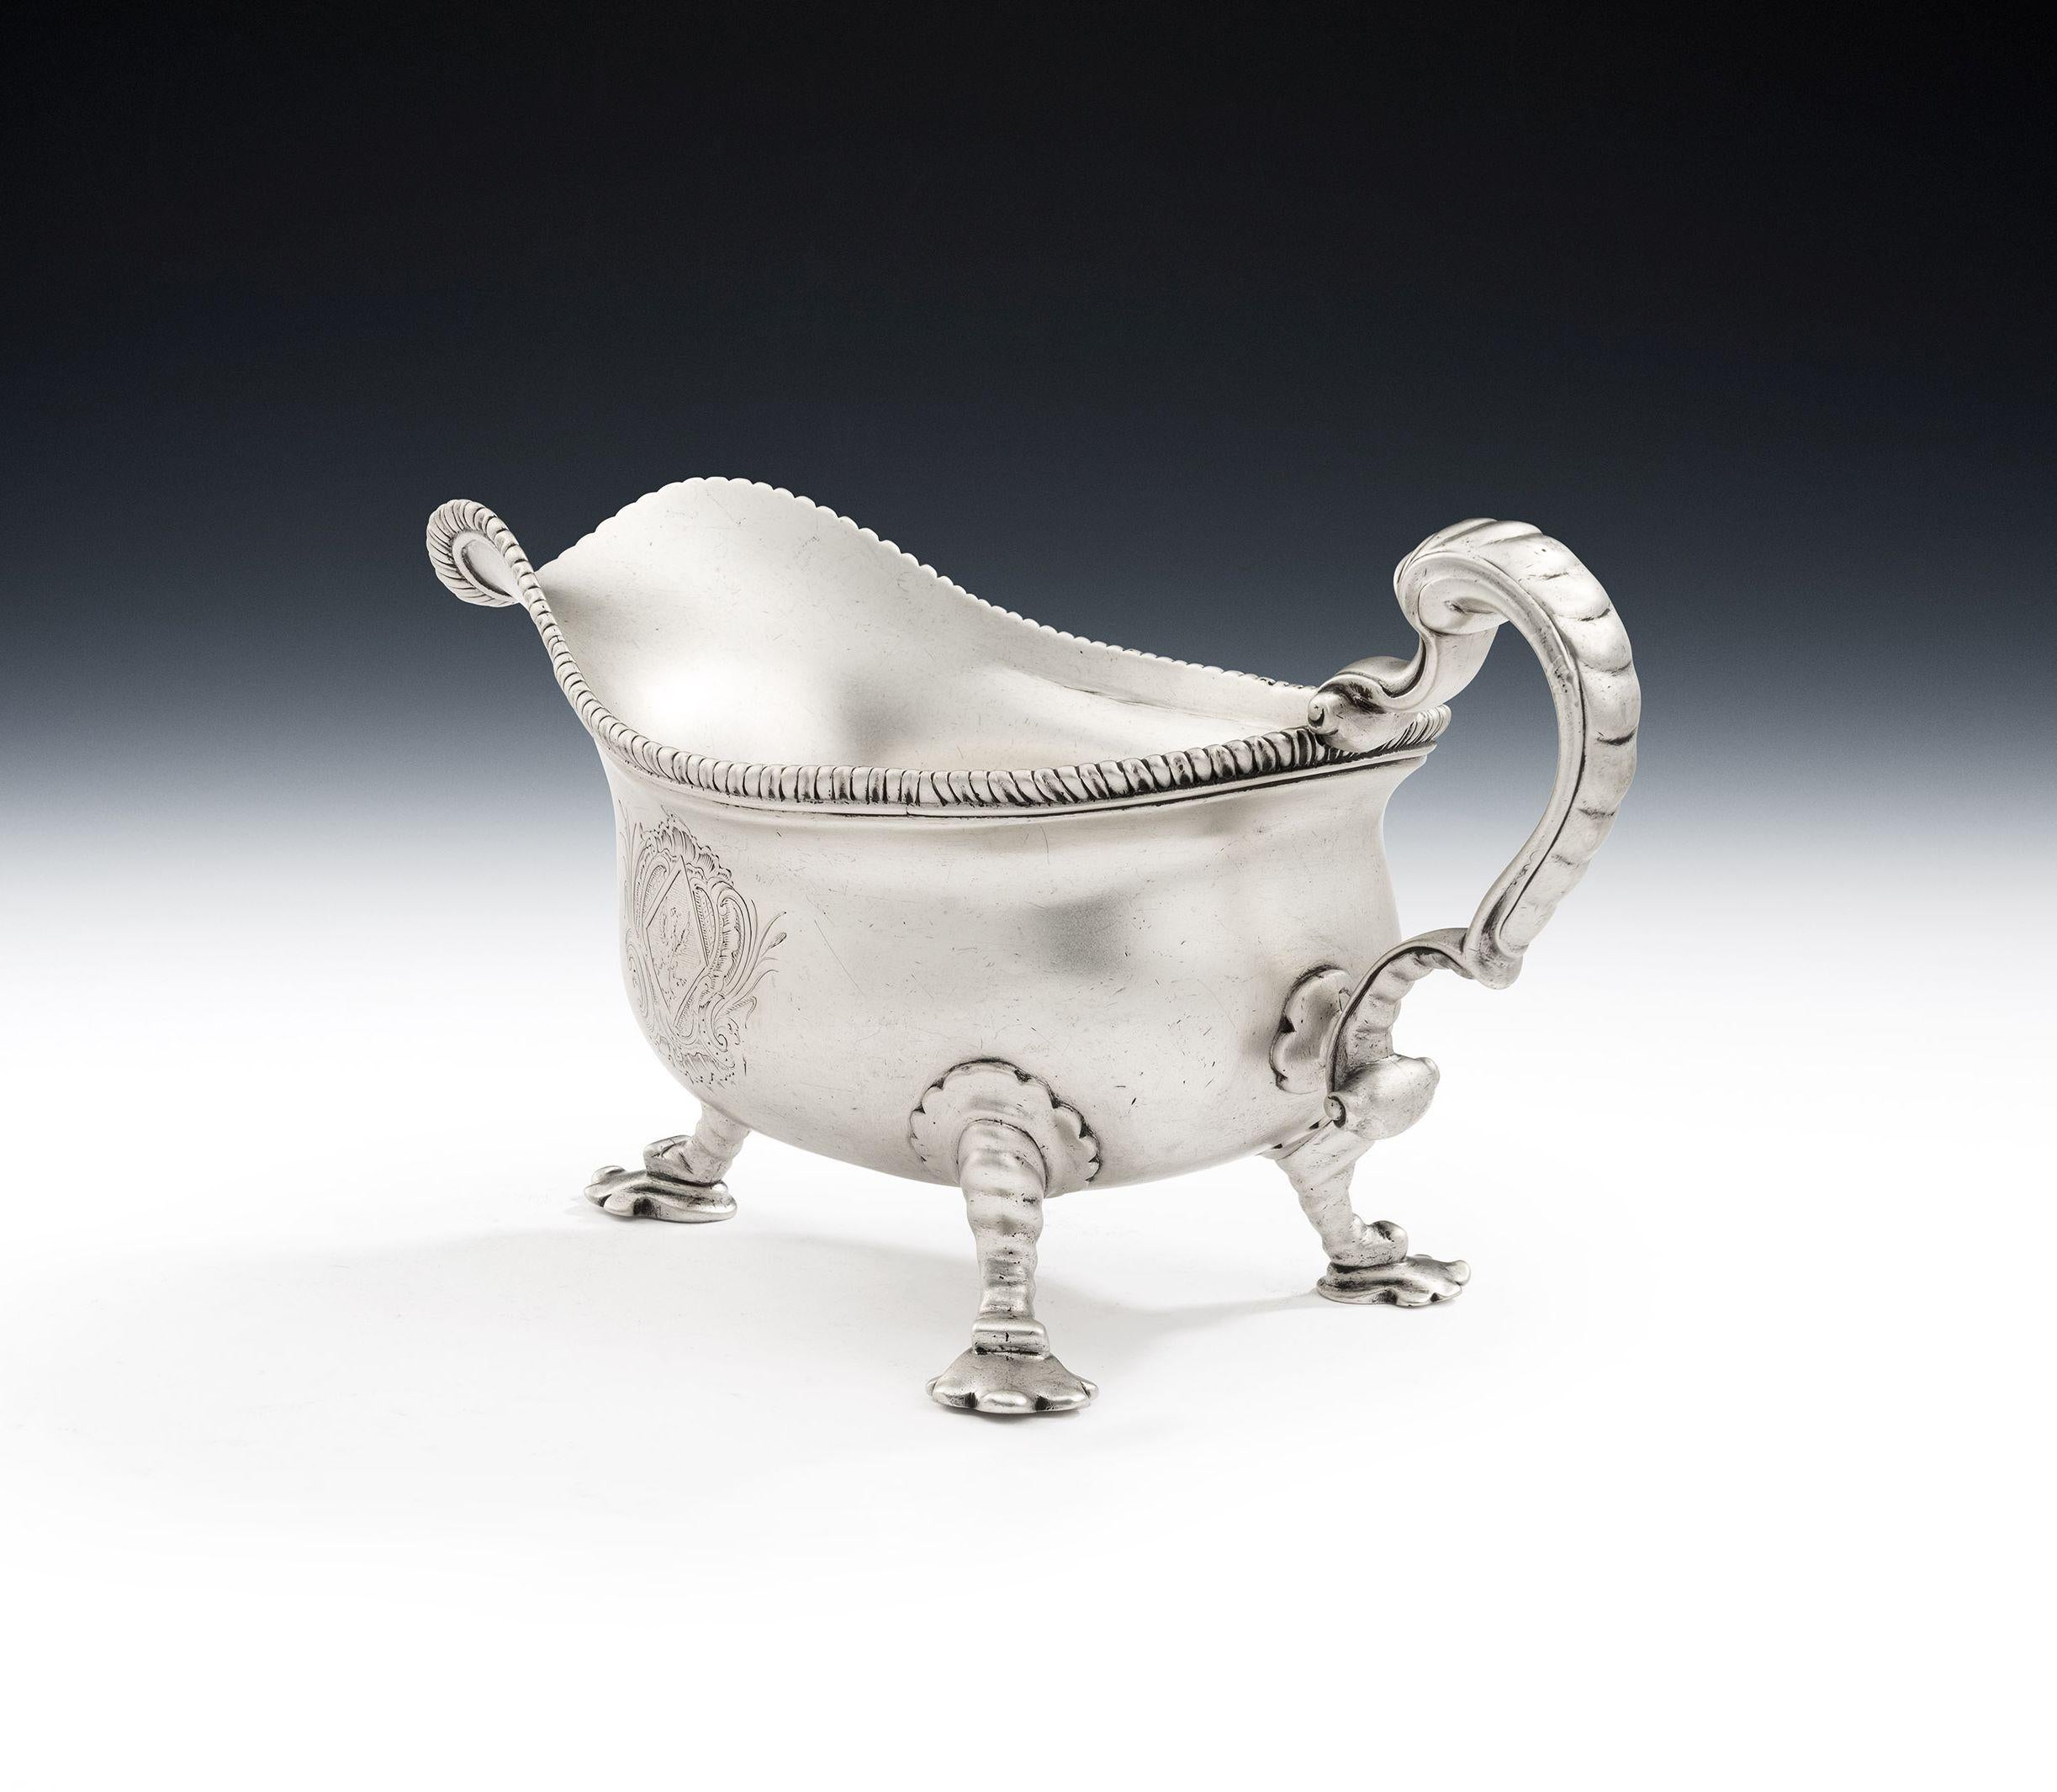 William Cripps. An Exceptionally Fine & Unusual George II Sauceboat Made in London in 1753 by William Cripps.

The Sauceboat is of a substantial size and has a slightly baluster body rising to an applied gadrooned rim. The main body stands on three